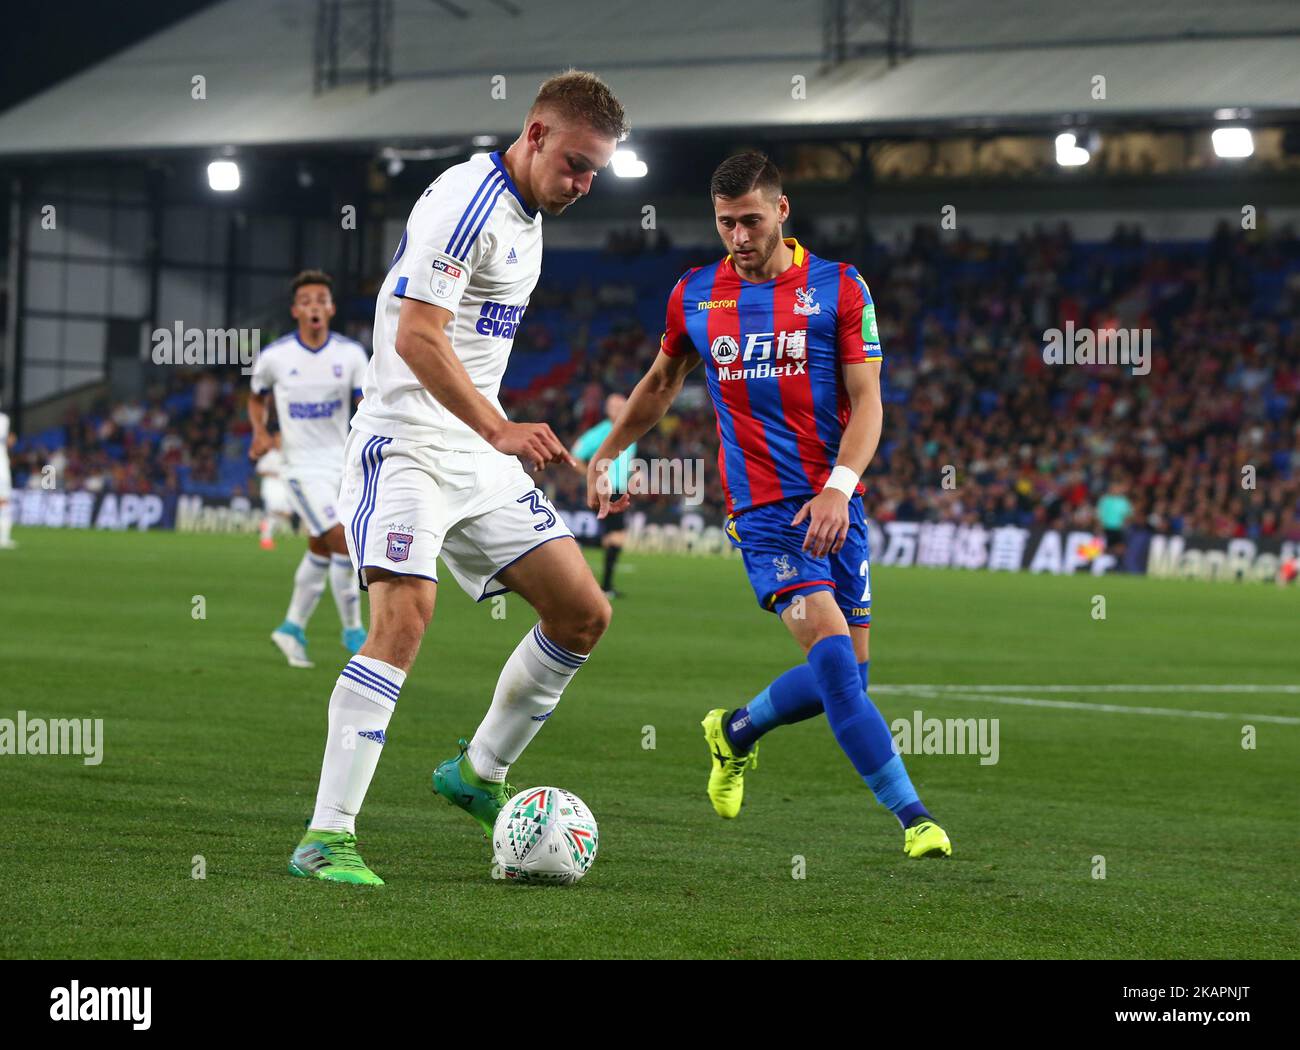 Ipswich Town's Luke Woolfenden during Carabao Cup 2nd Round match between Crystal Palace and Ipswich Town at Selhurst Park Stadium in London, England on August 22, 2017. (Photo by Kieran Galvin/NurPhoto)  Stock Photo